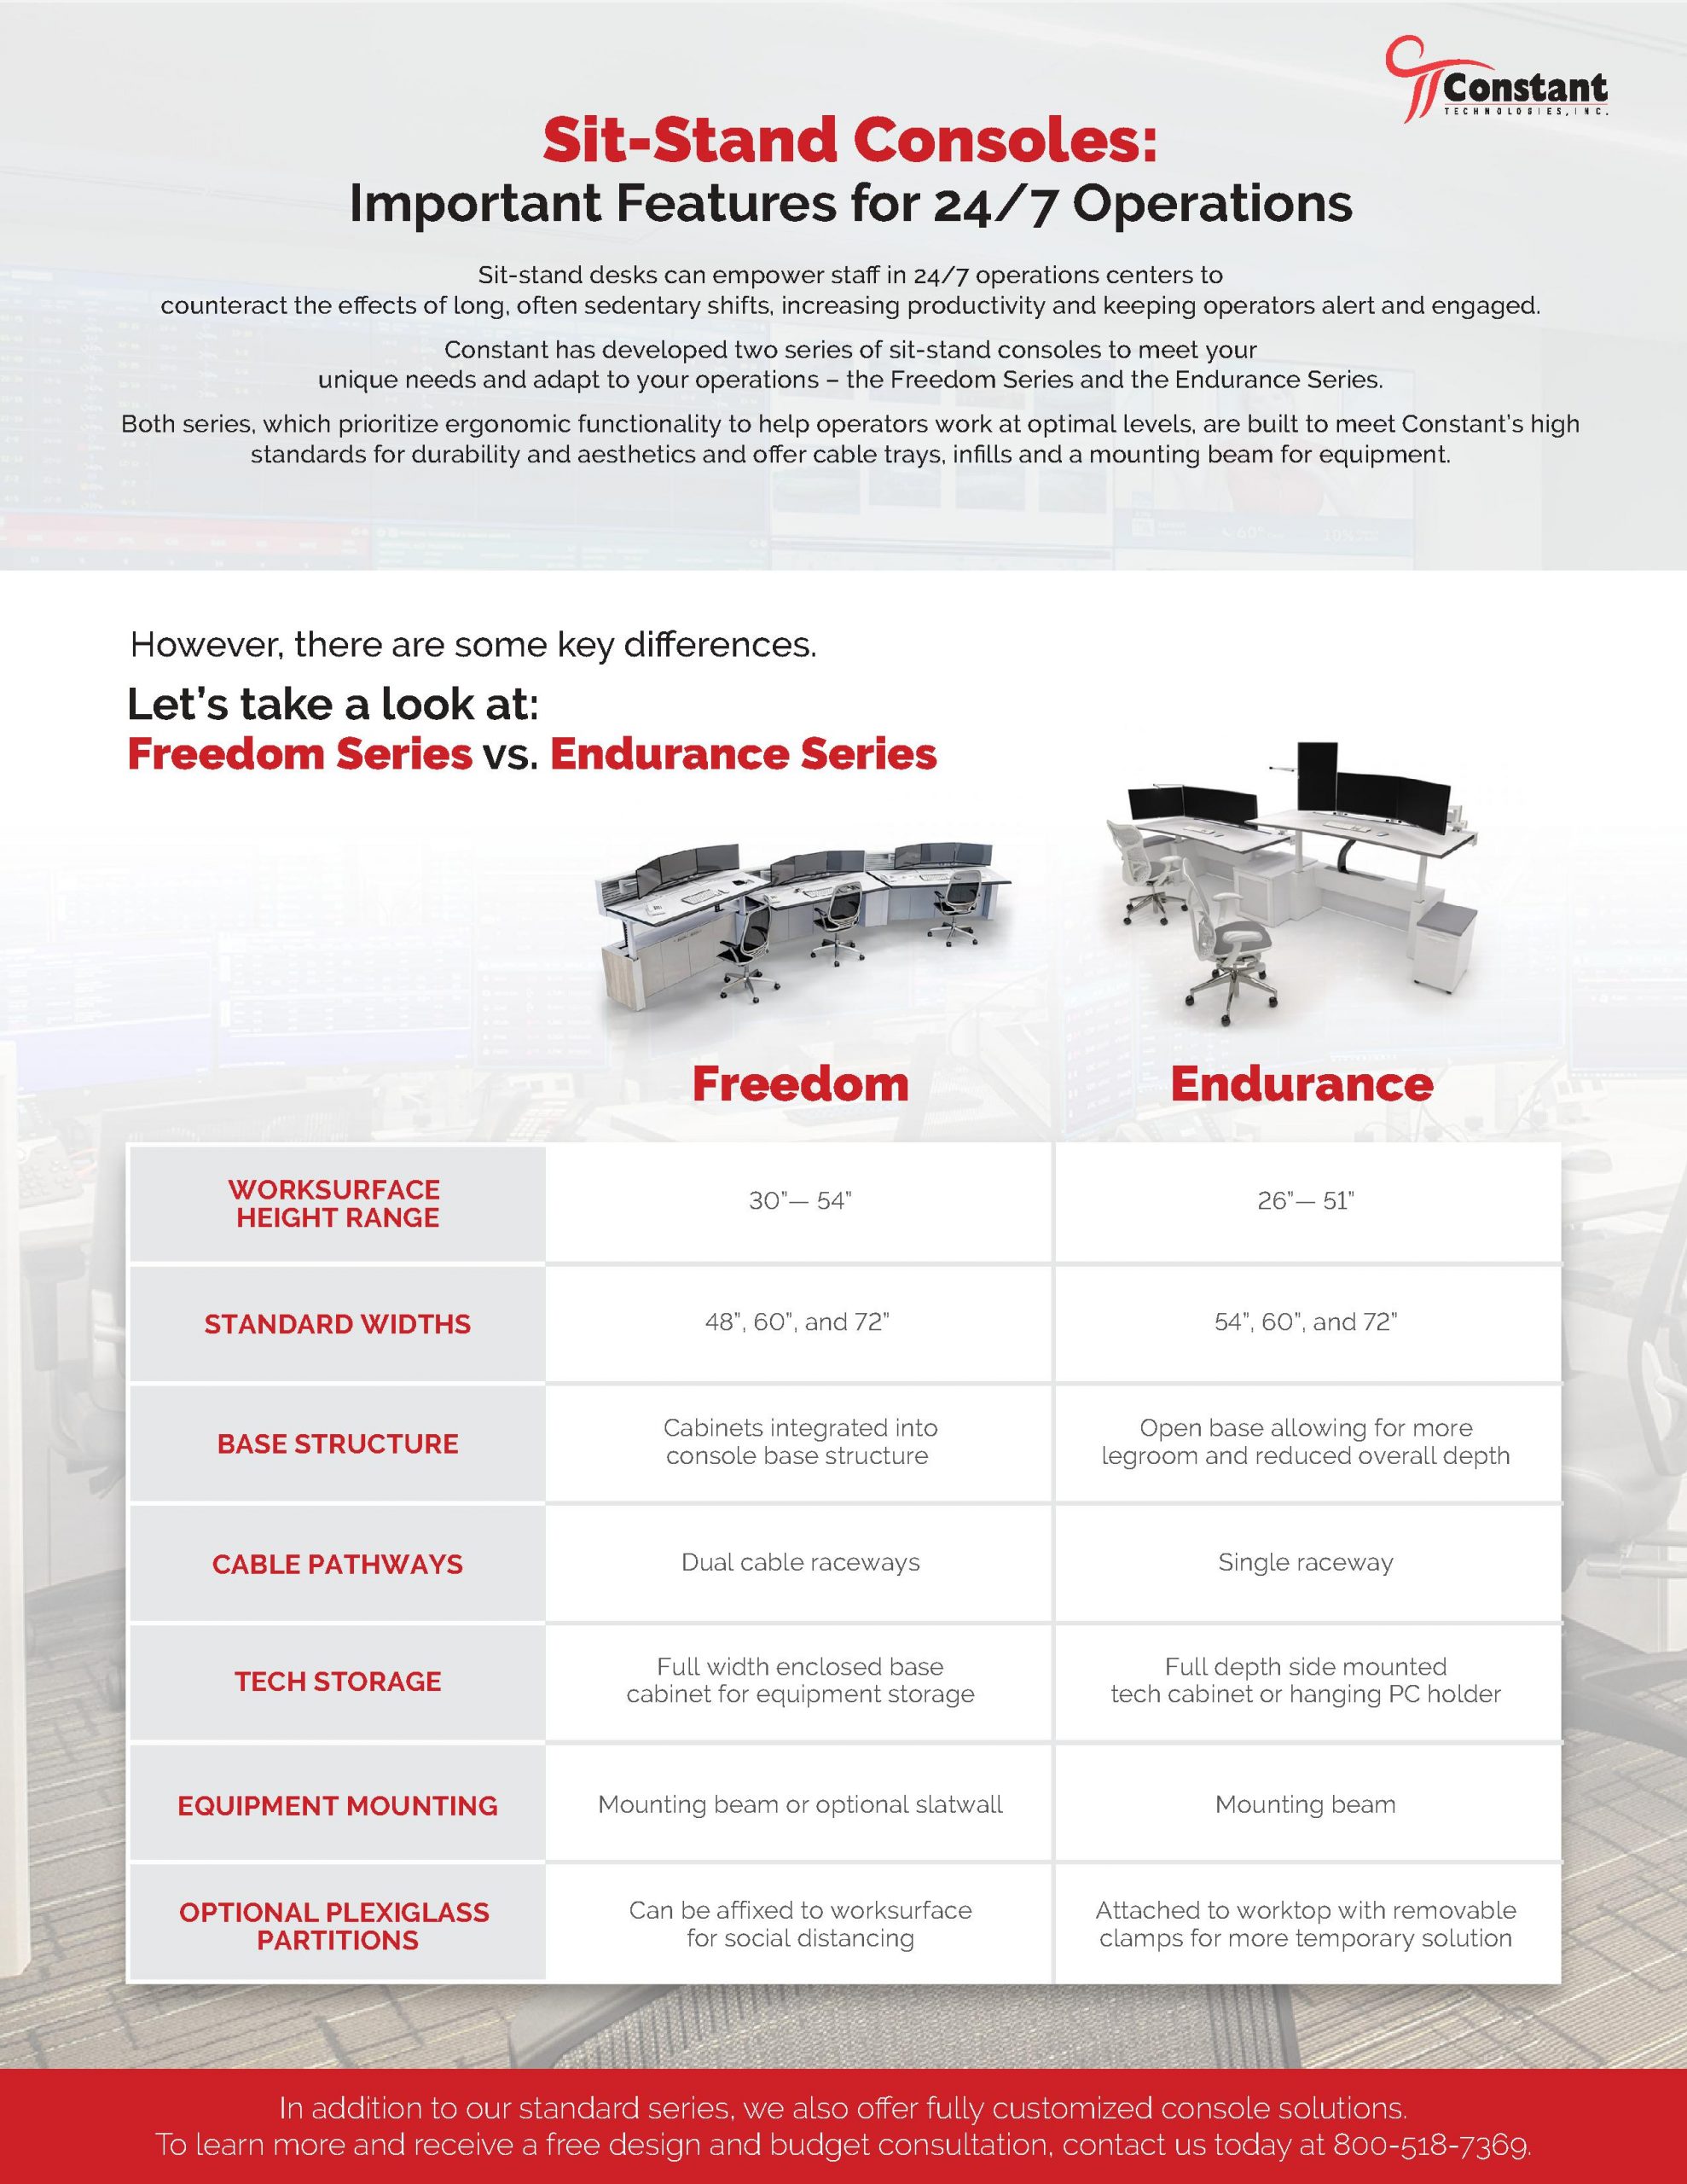 Infographic comparing Constant's Freedom and Endurance sit-stand consoles